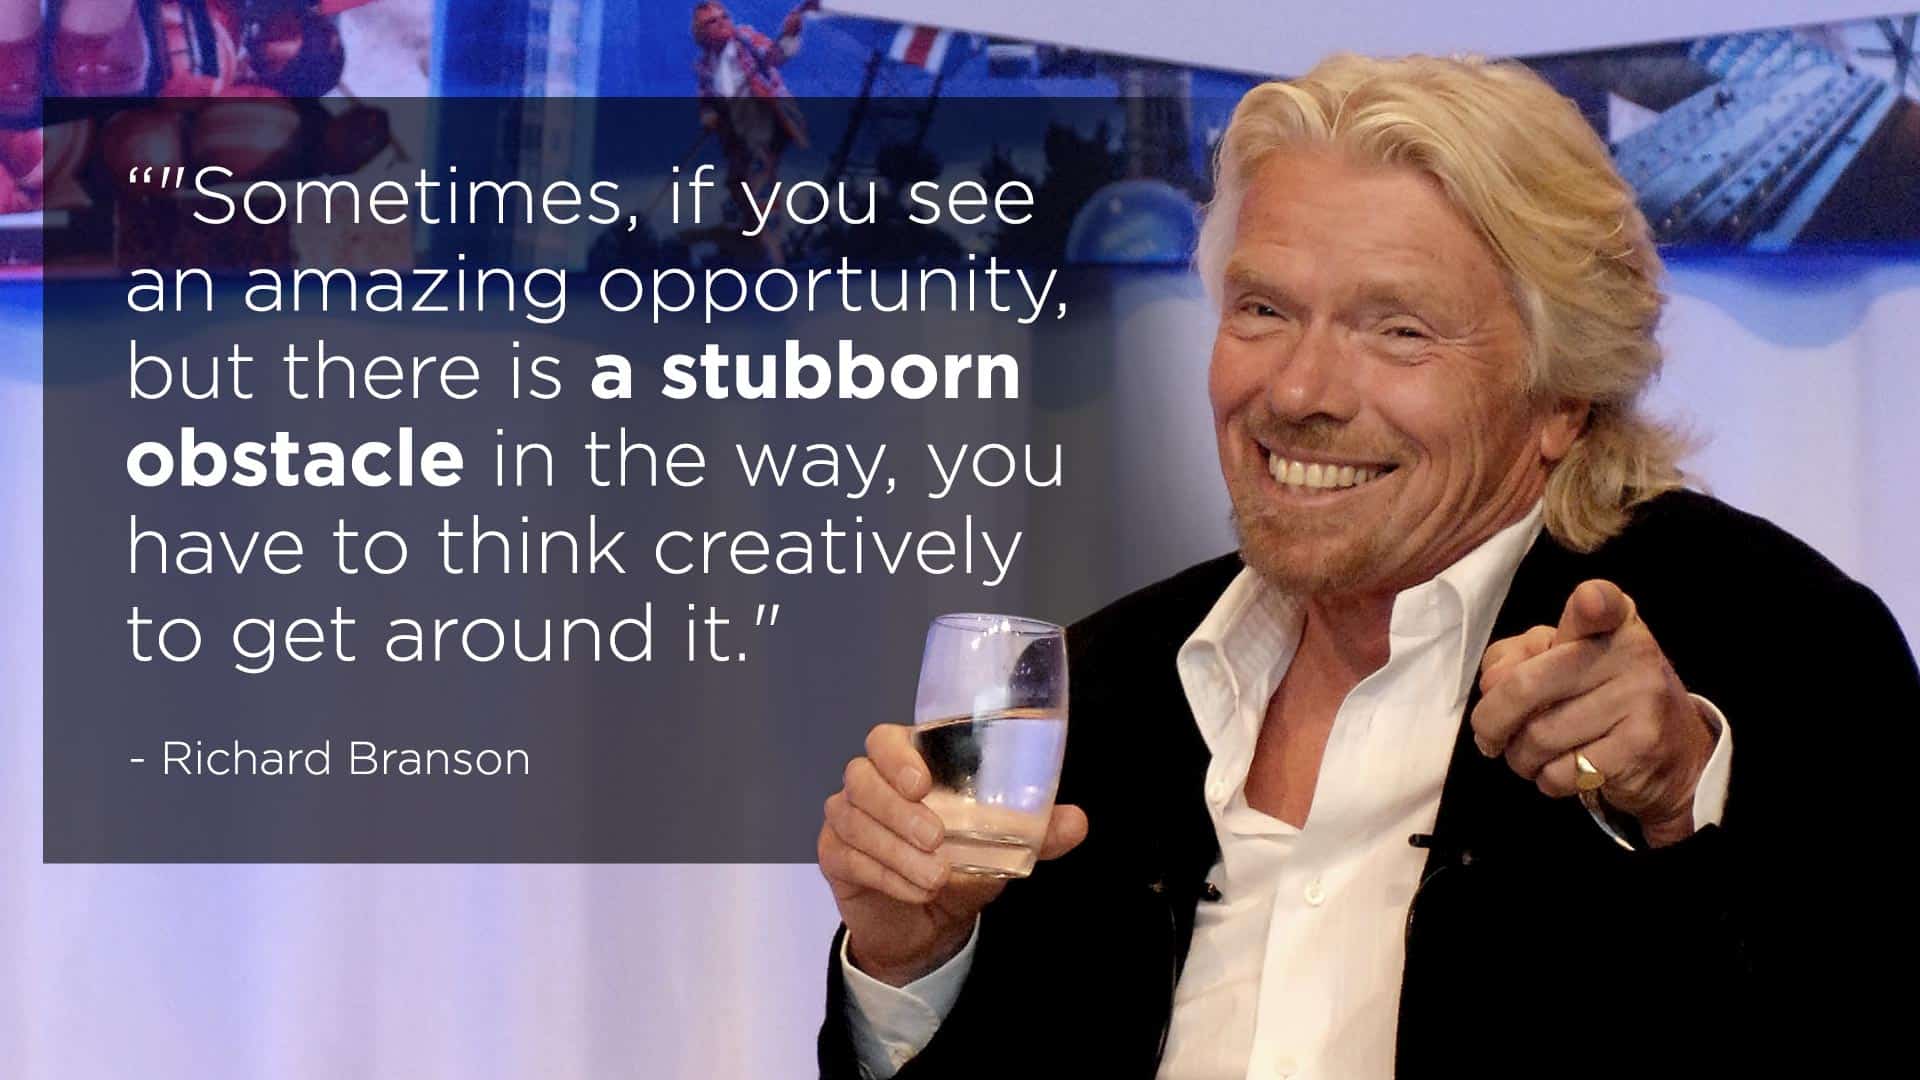 Richard Branson quote on obstacles